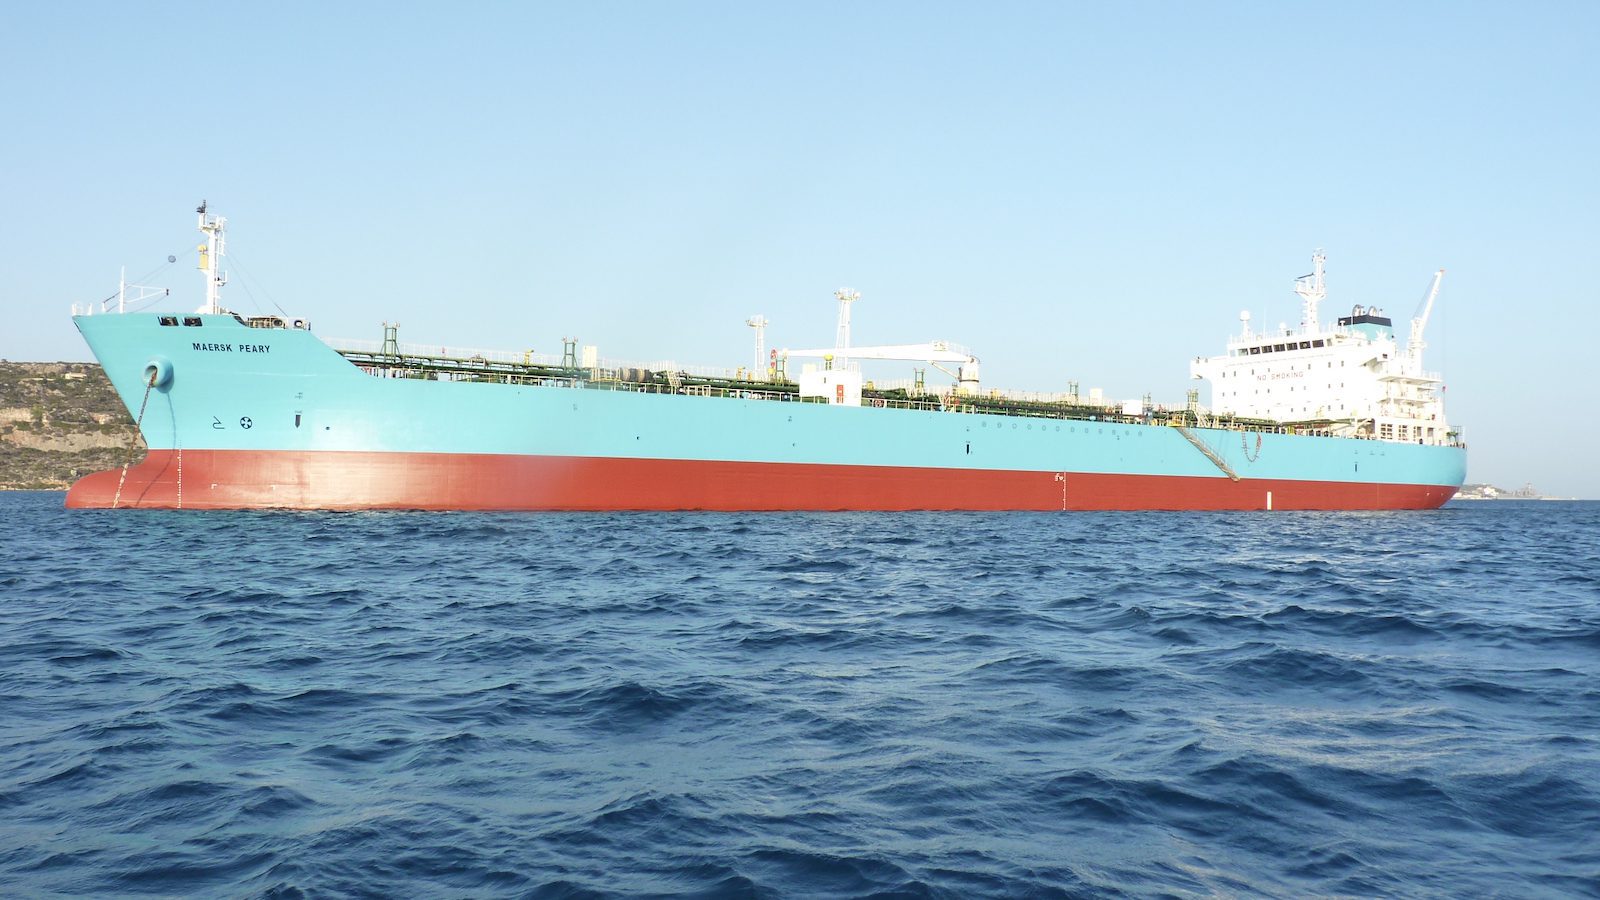 Maersk Line, Limited Tanker Makes Nighttime Rescue in Aegean Sea